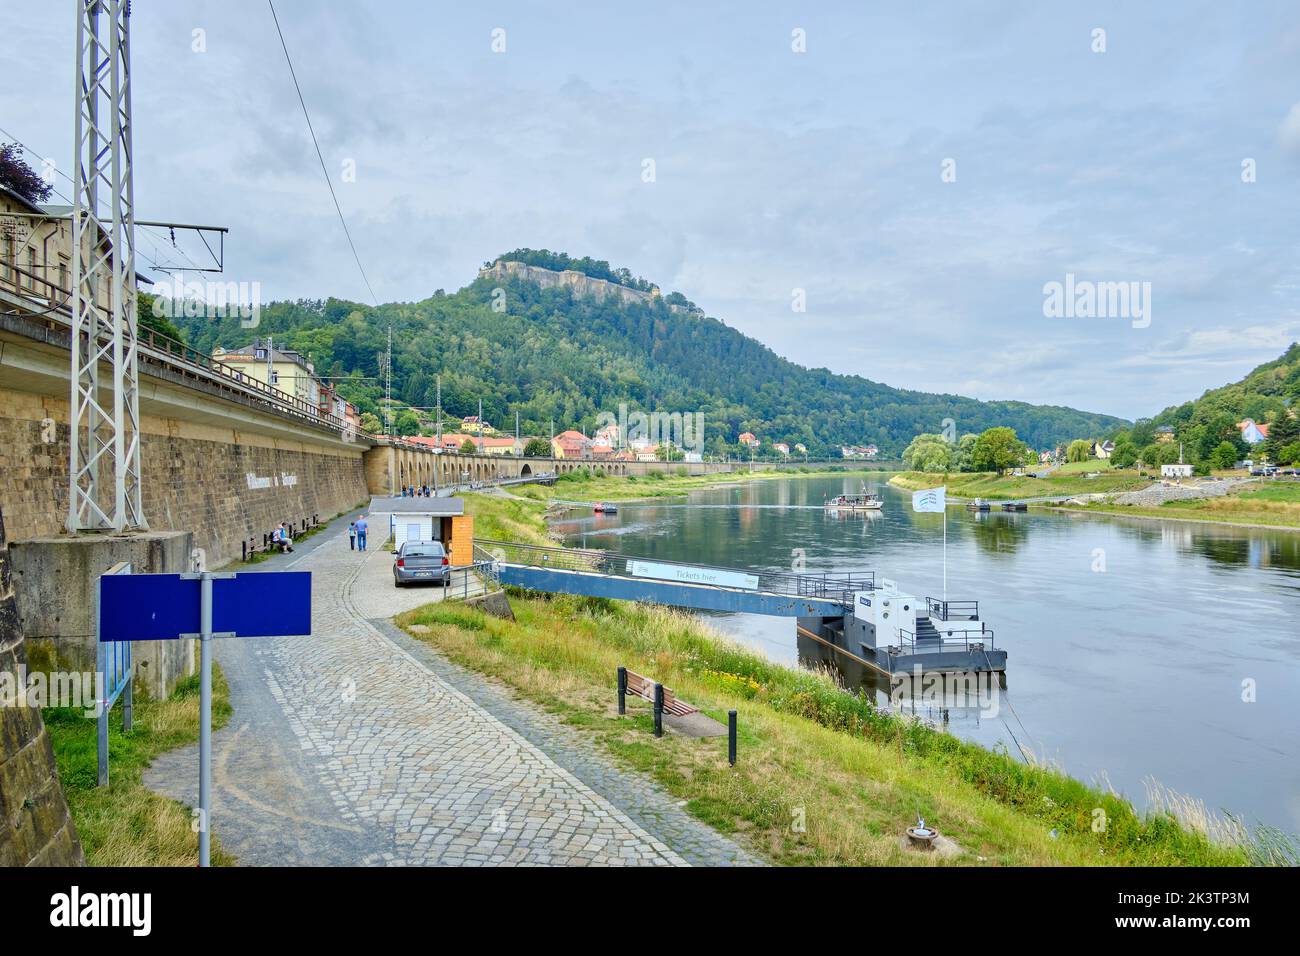 Königstein, Saxony, Germany, August 7, 2019: Idyllic Elbe river scenery and ferry in Saxon Switzerland as well as the famous Königstein Fortress. Stock Photo